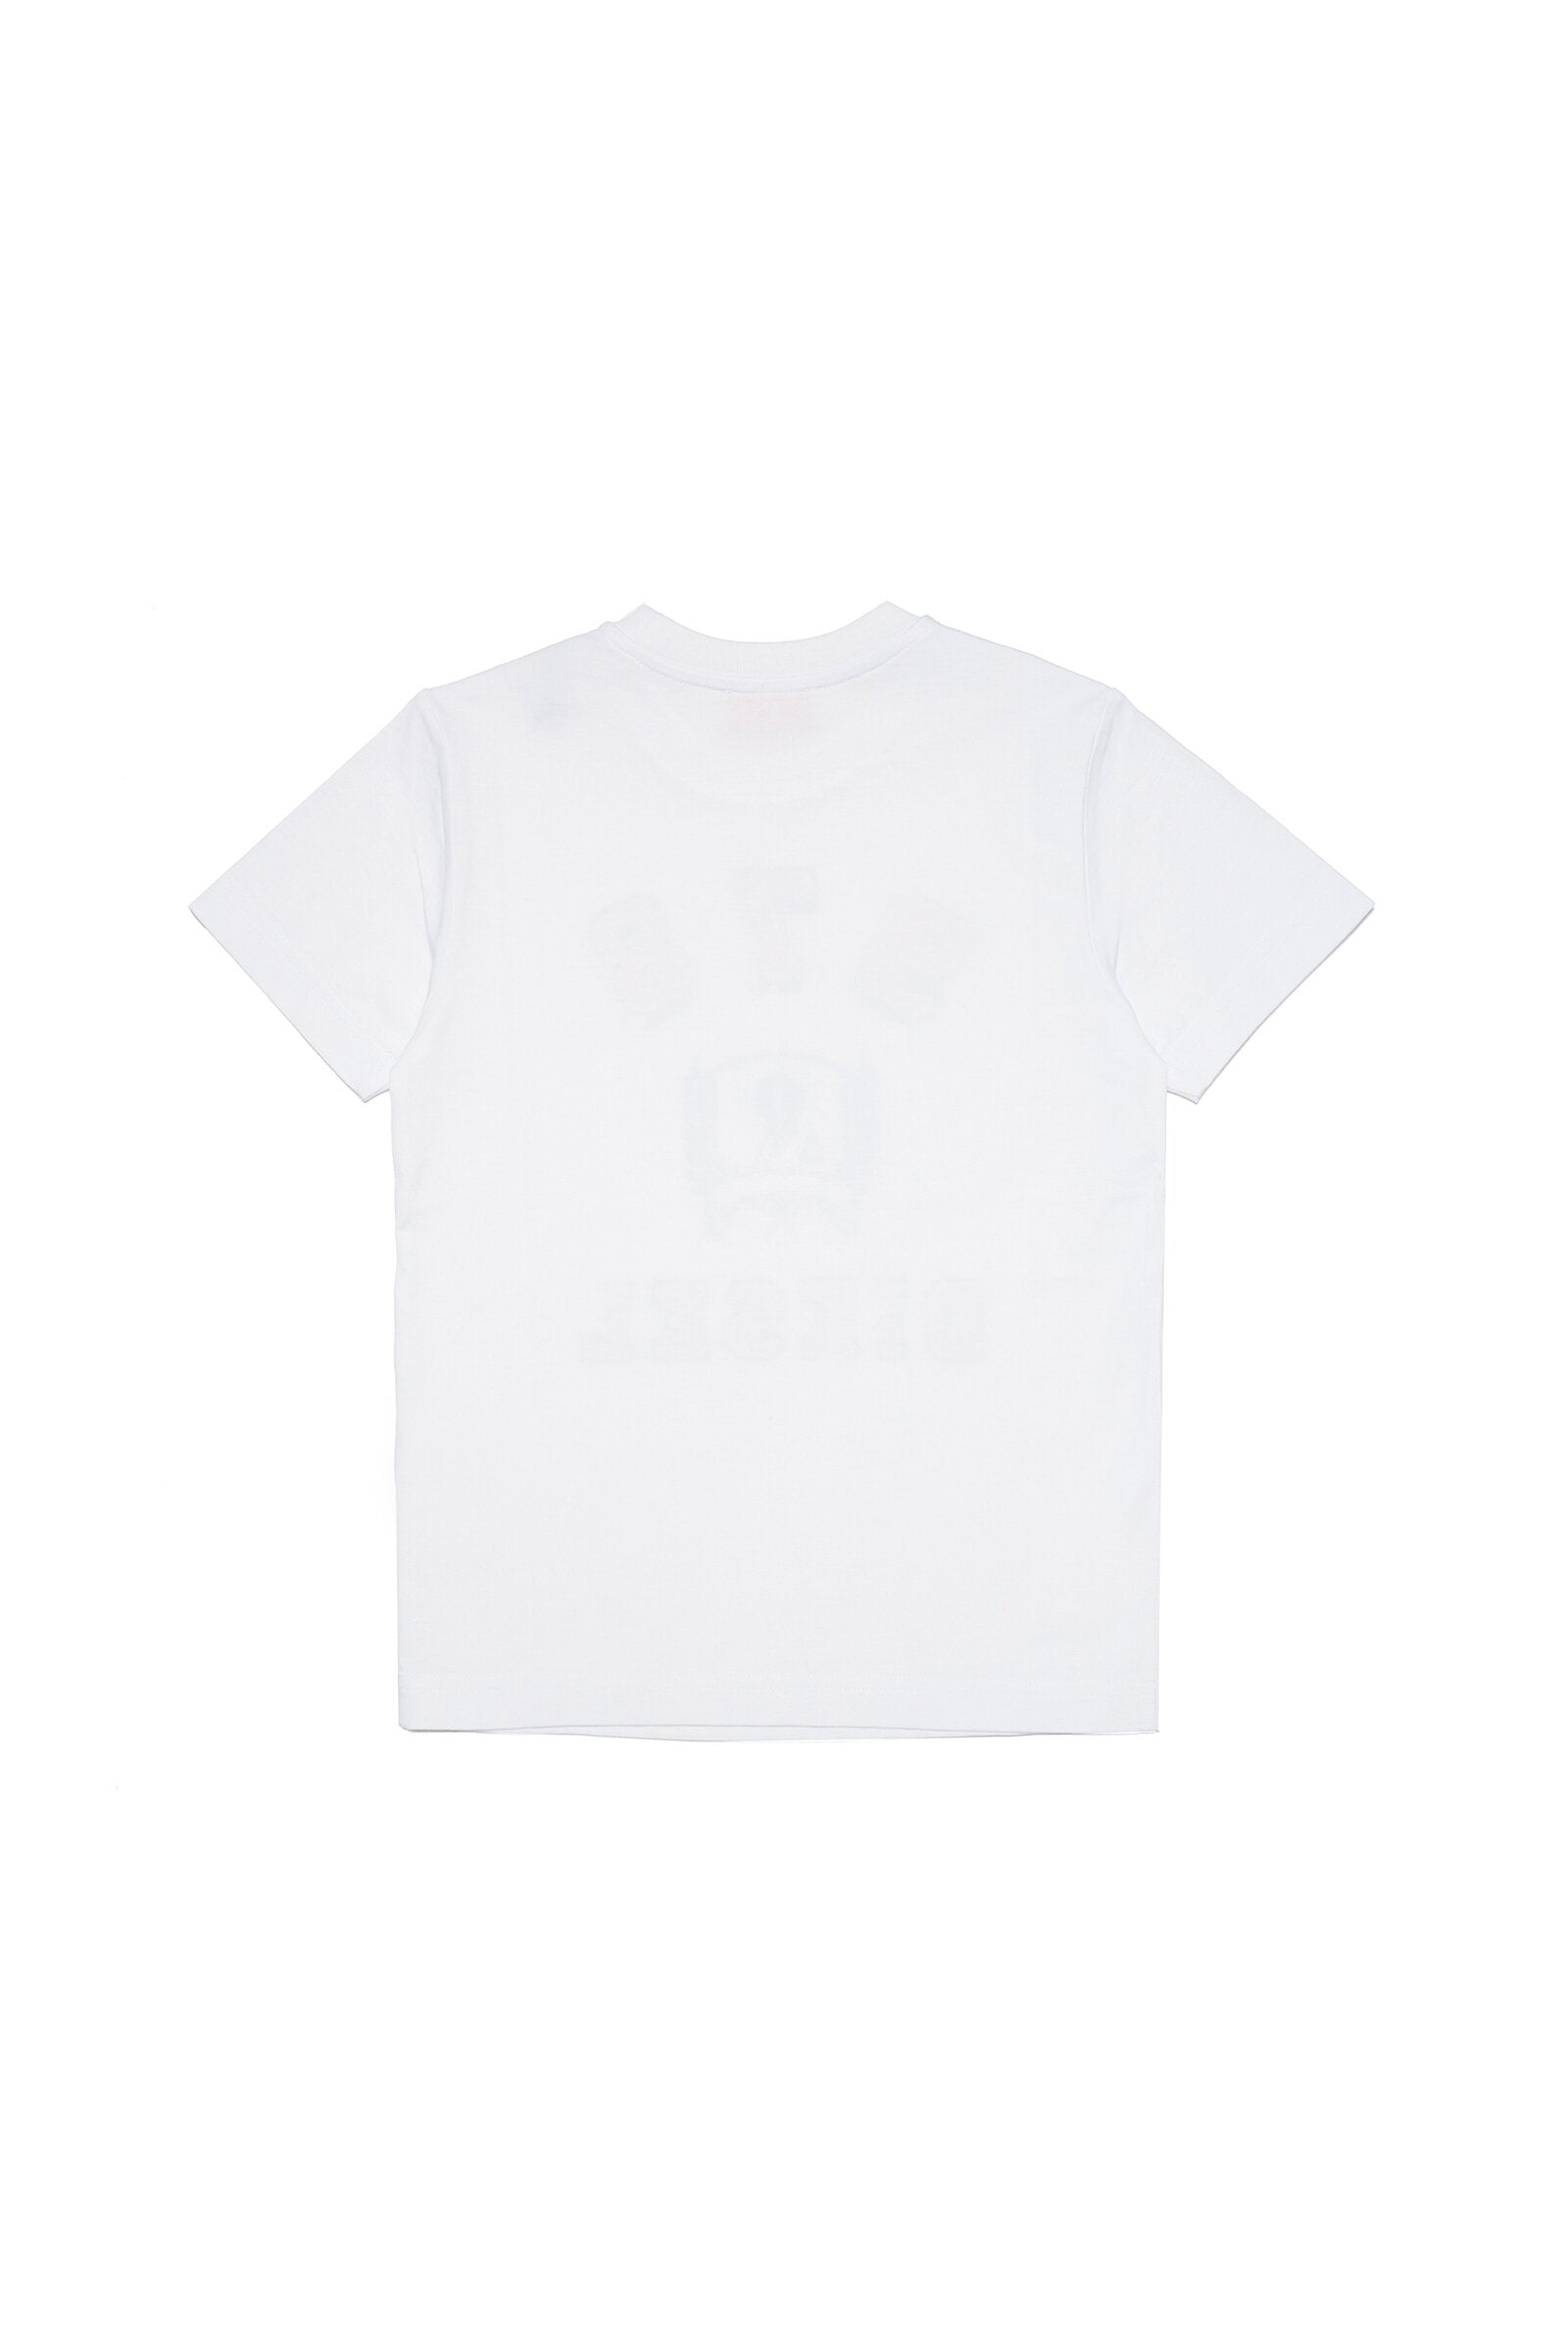 White jersey T-shirt with crest and logo